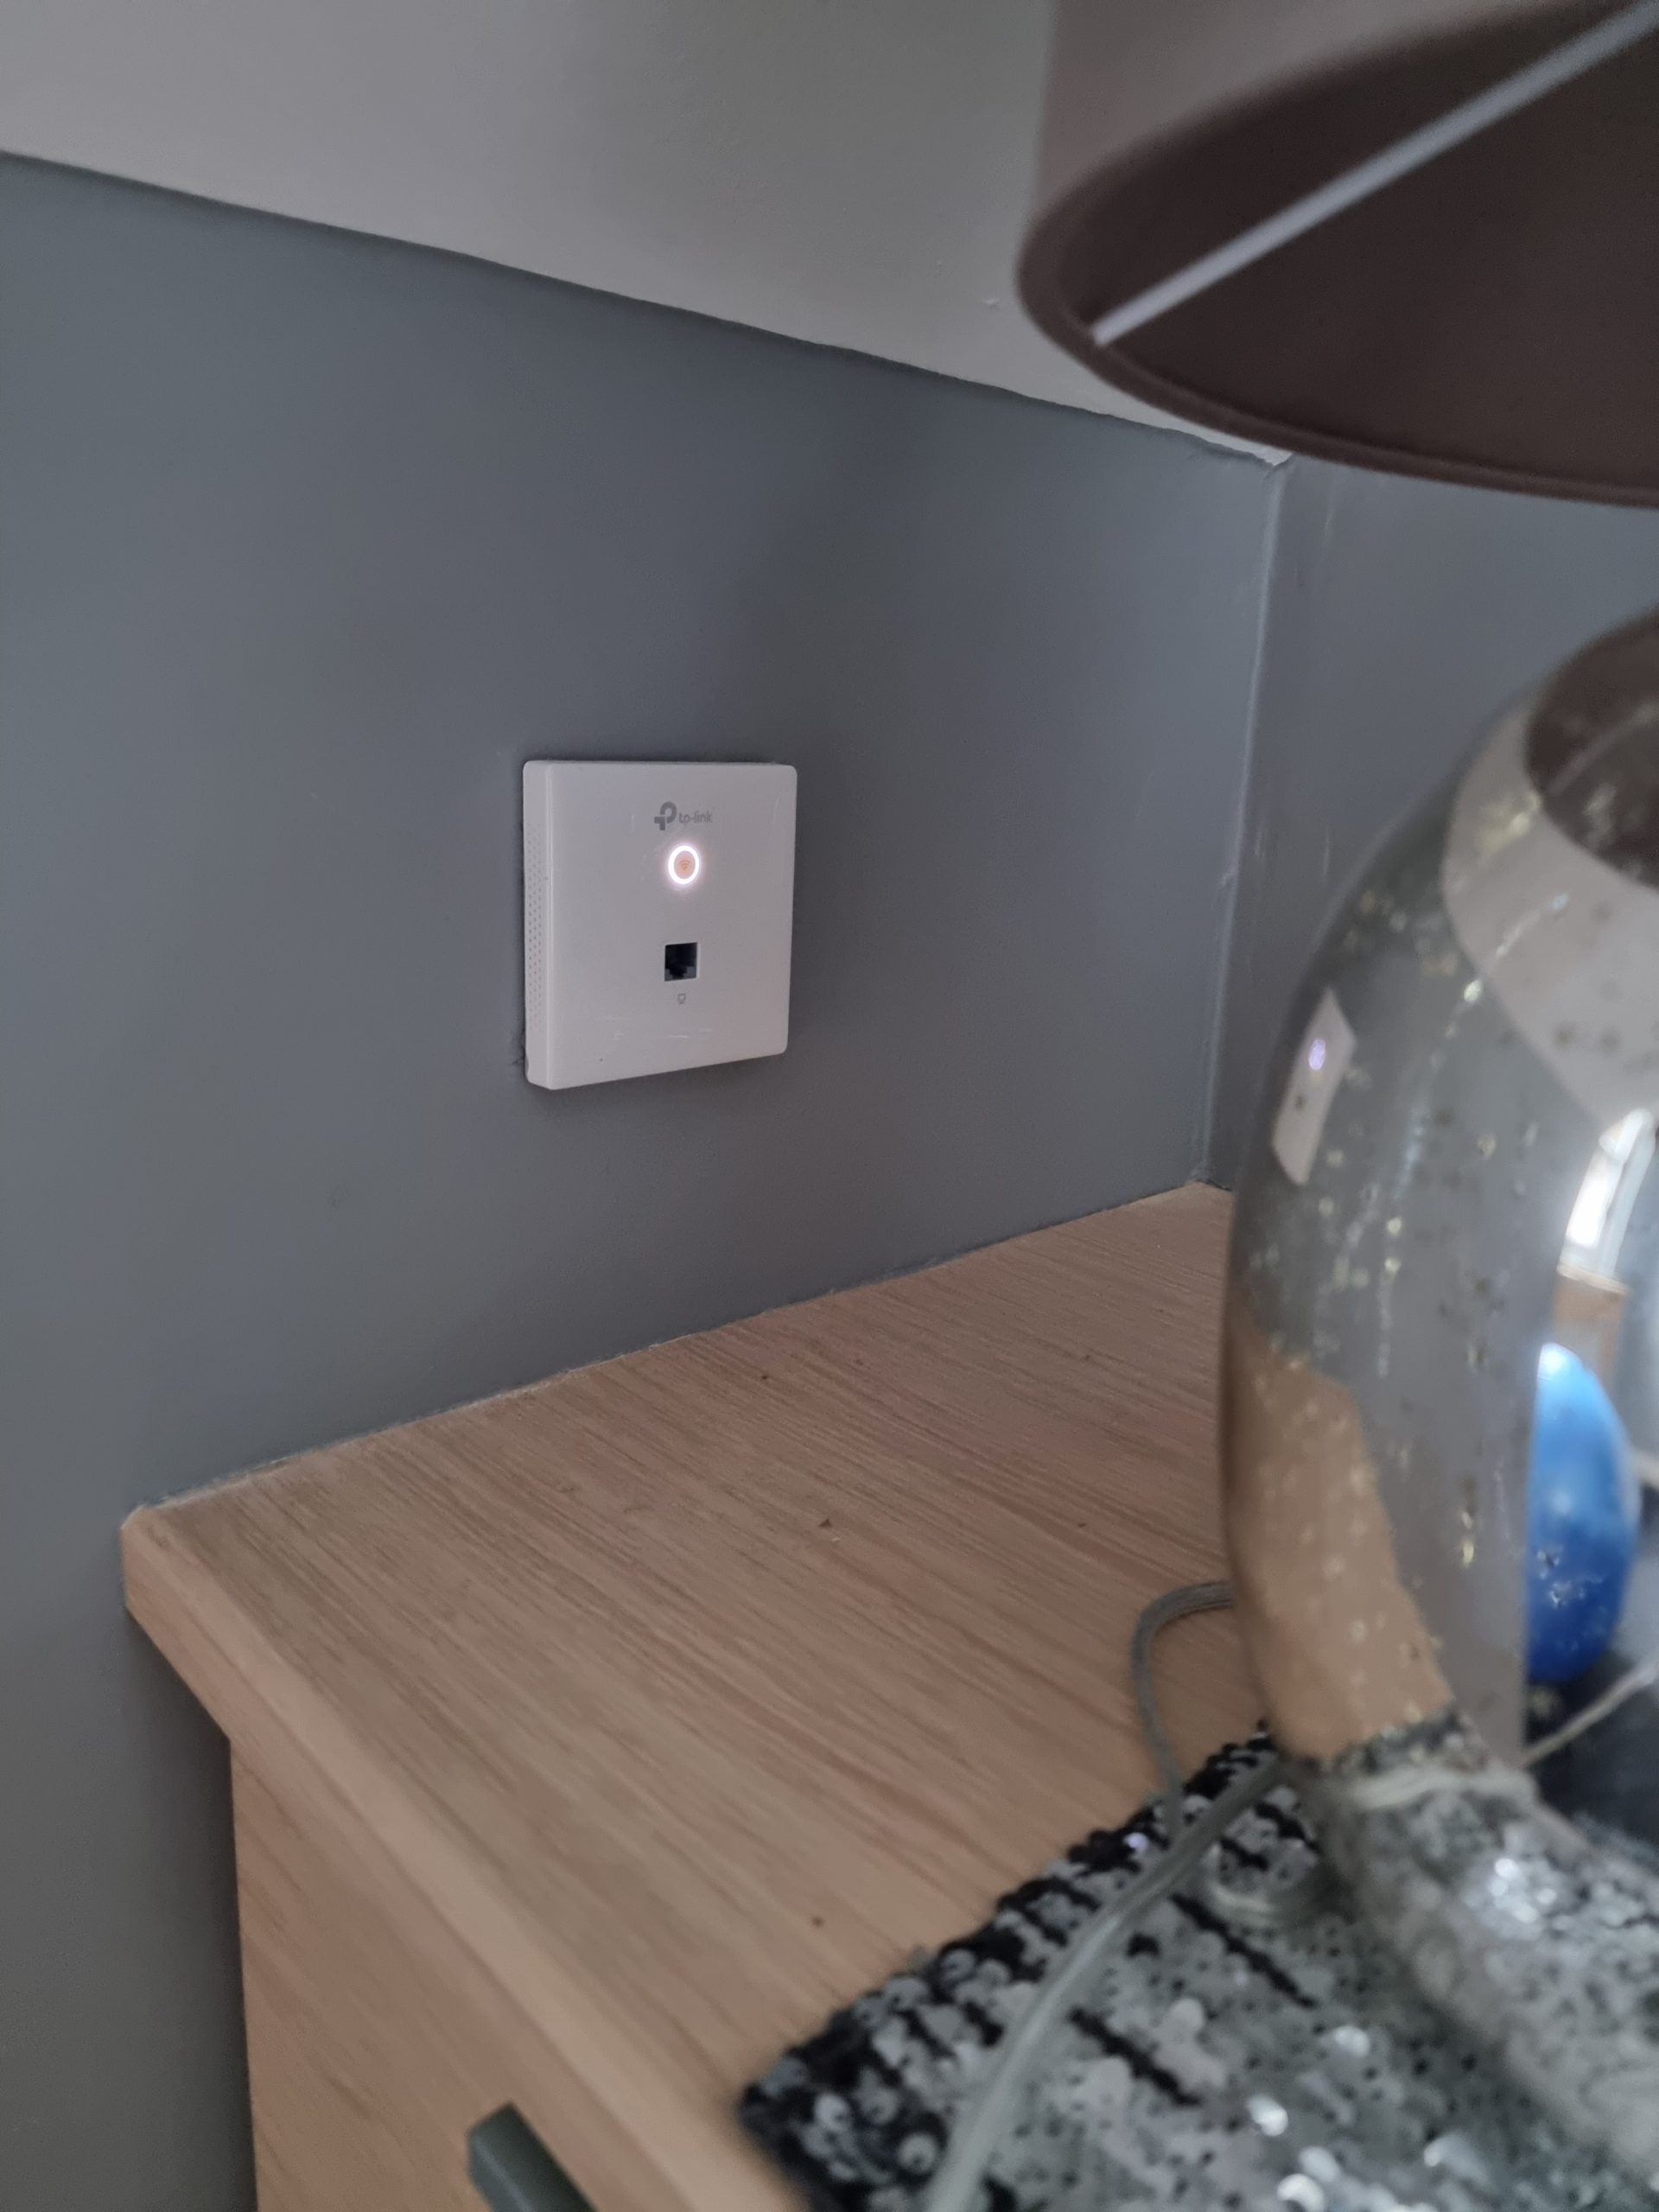 TP-Link WiFi installed in wall reflecting off metal lamp, blending technology seamlessly into the environment for enhanced connectivity.